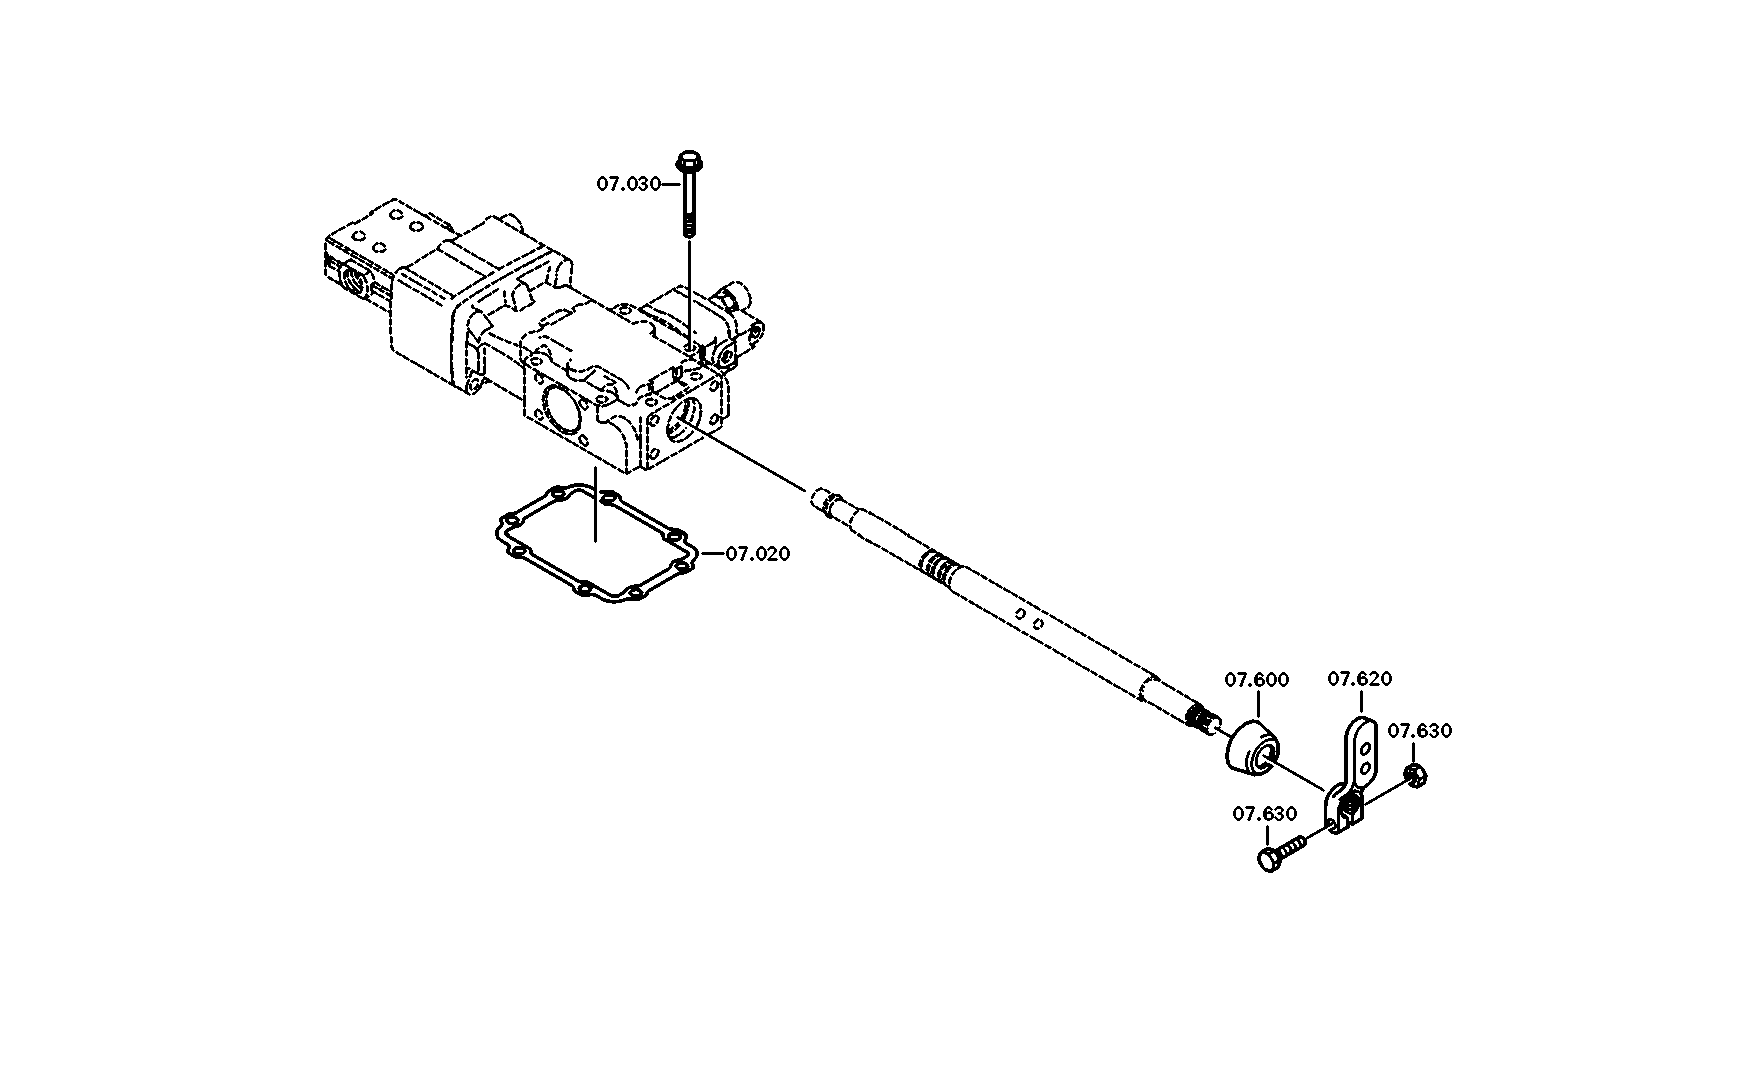 drawing for Astra Veicoli Industriali 00111960 - SHIFT LEVER